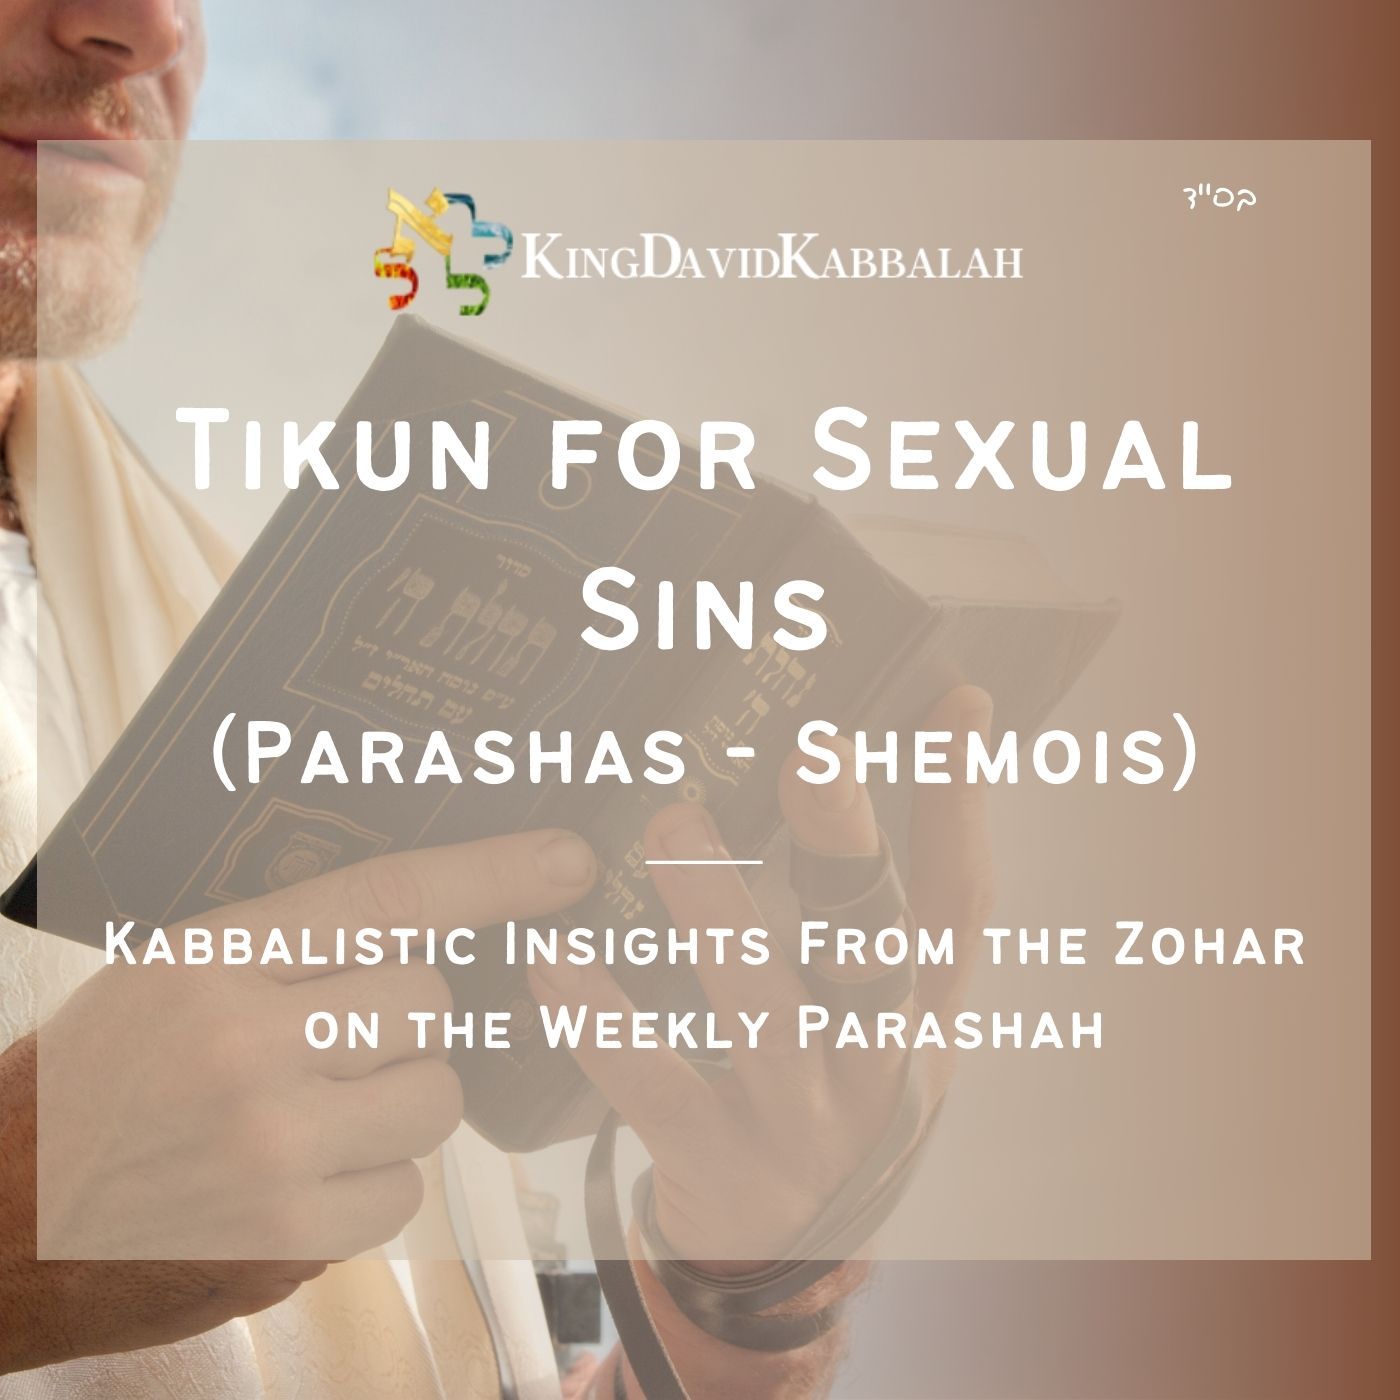 Tikun for Sexual Sins - Kabbalistic Inspiration on the Parasha from the Zohar